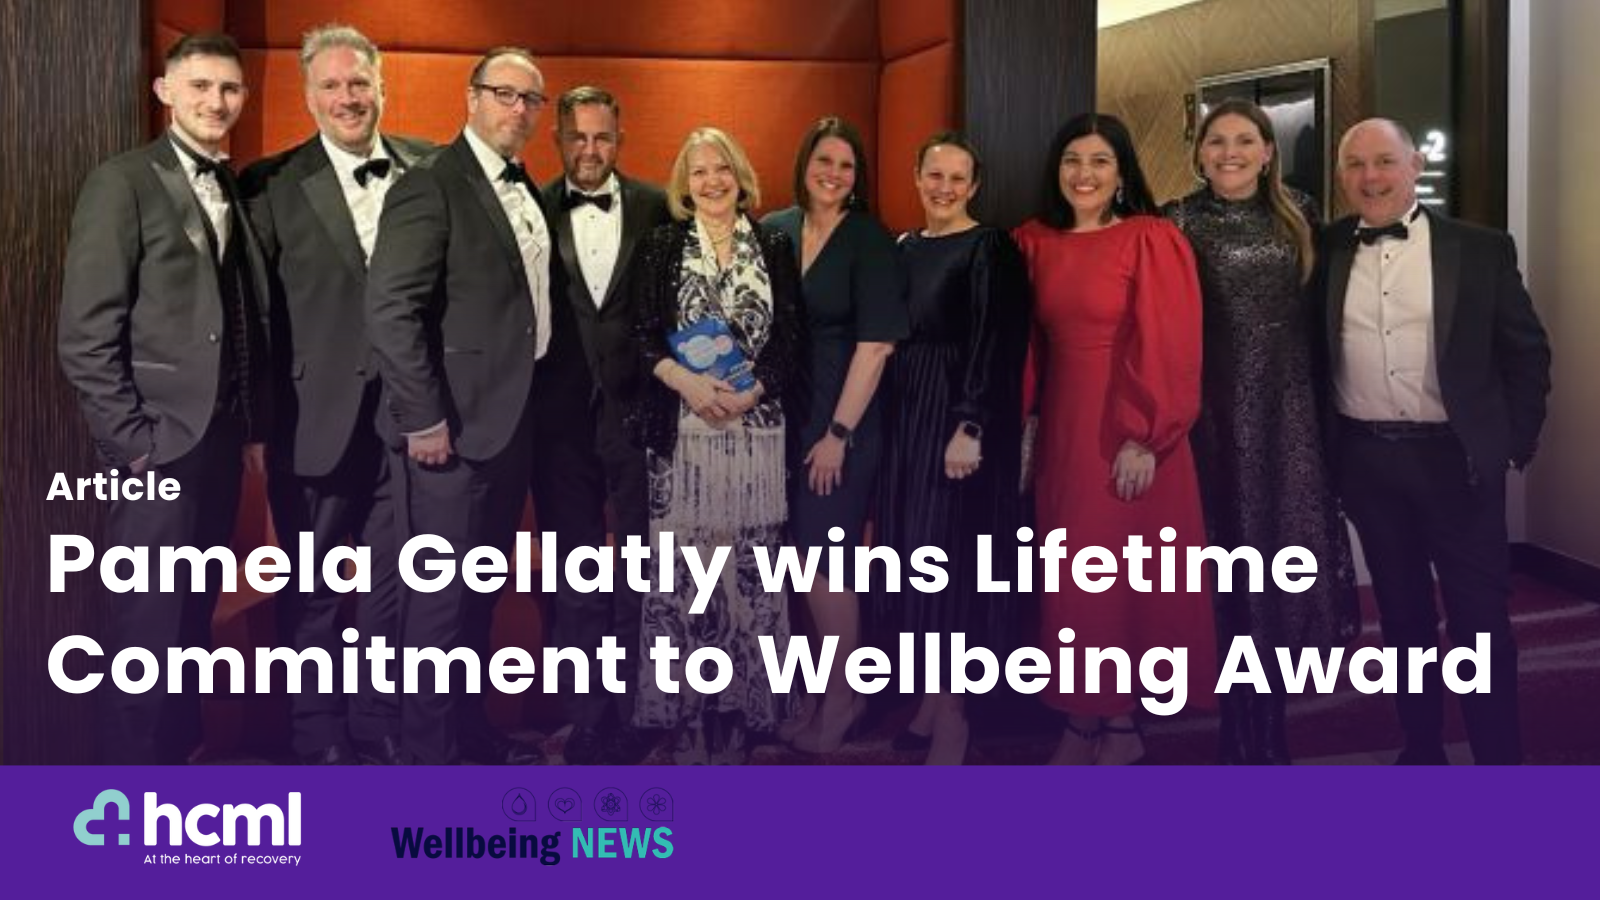 Pamela Gellatly wins Lifetime Commitment to Wellbeing at Great British Workplace Wellbeing Awards